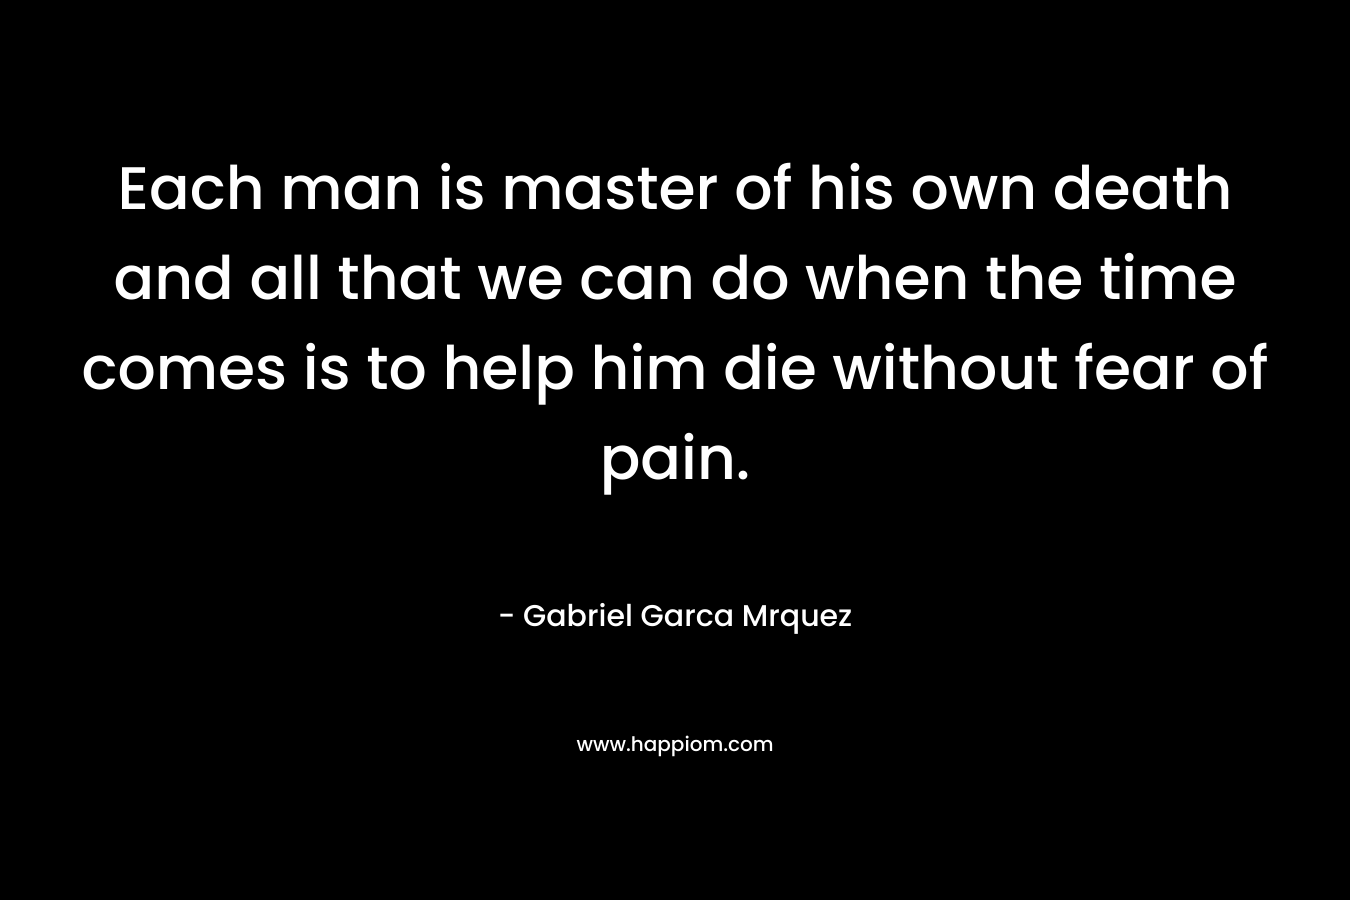 Each man is master of his own death and all that we can do when the time comes is to help him die without fear of pain. – Gabriel Garca Mrquez